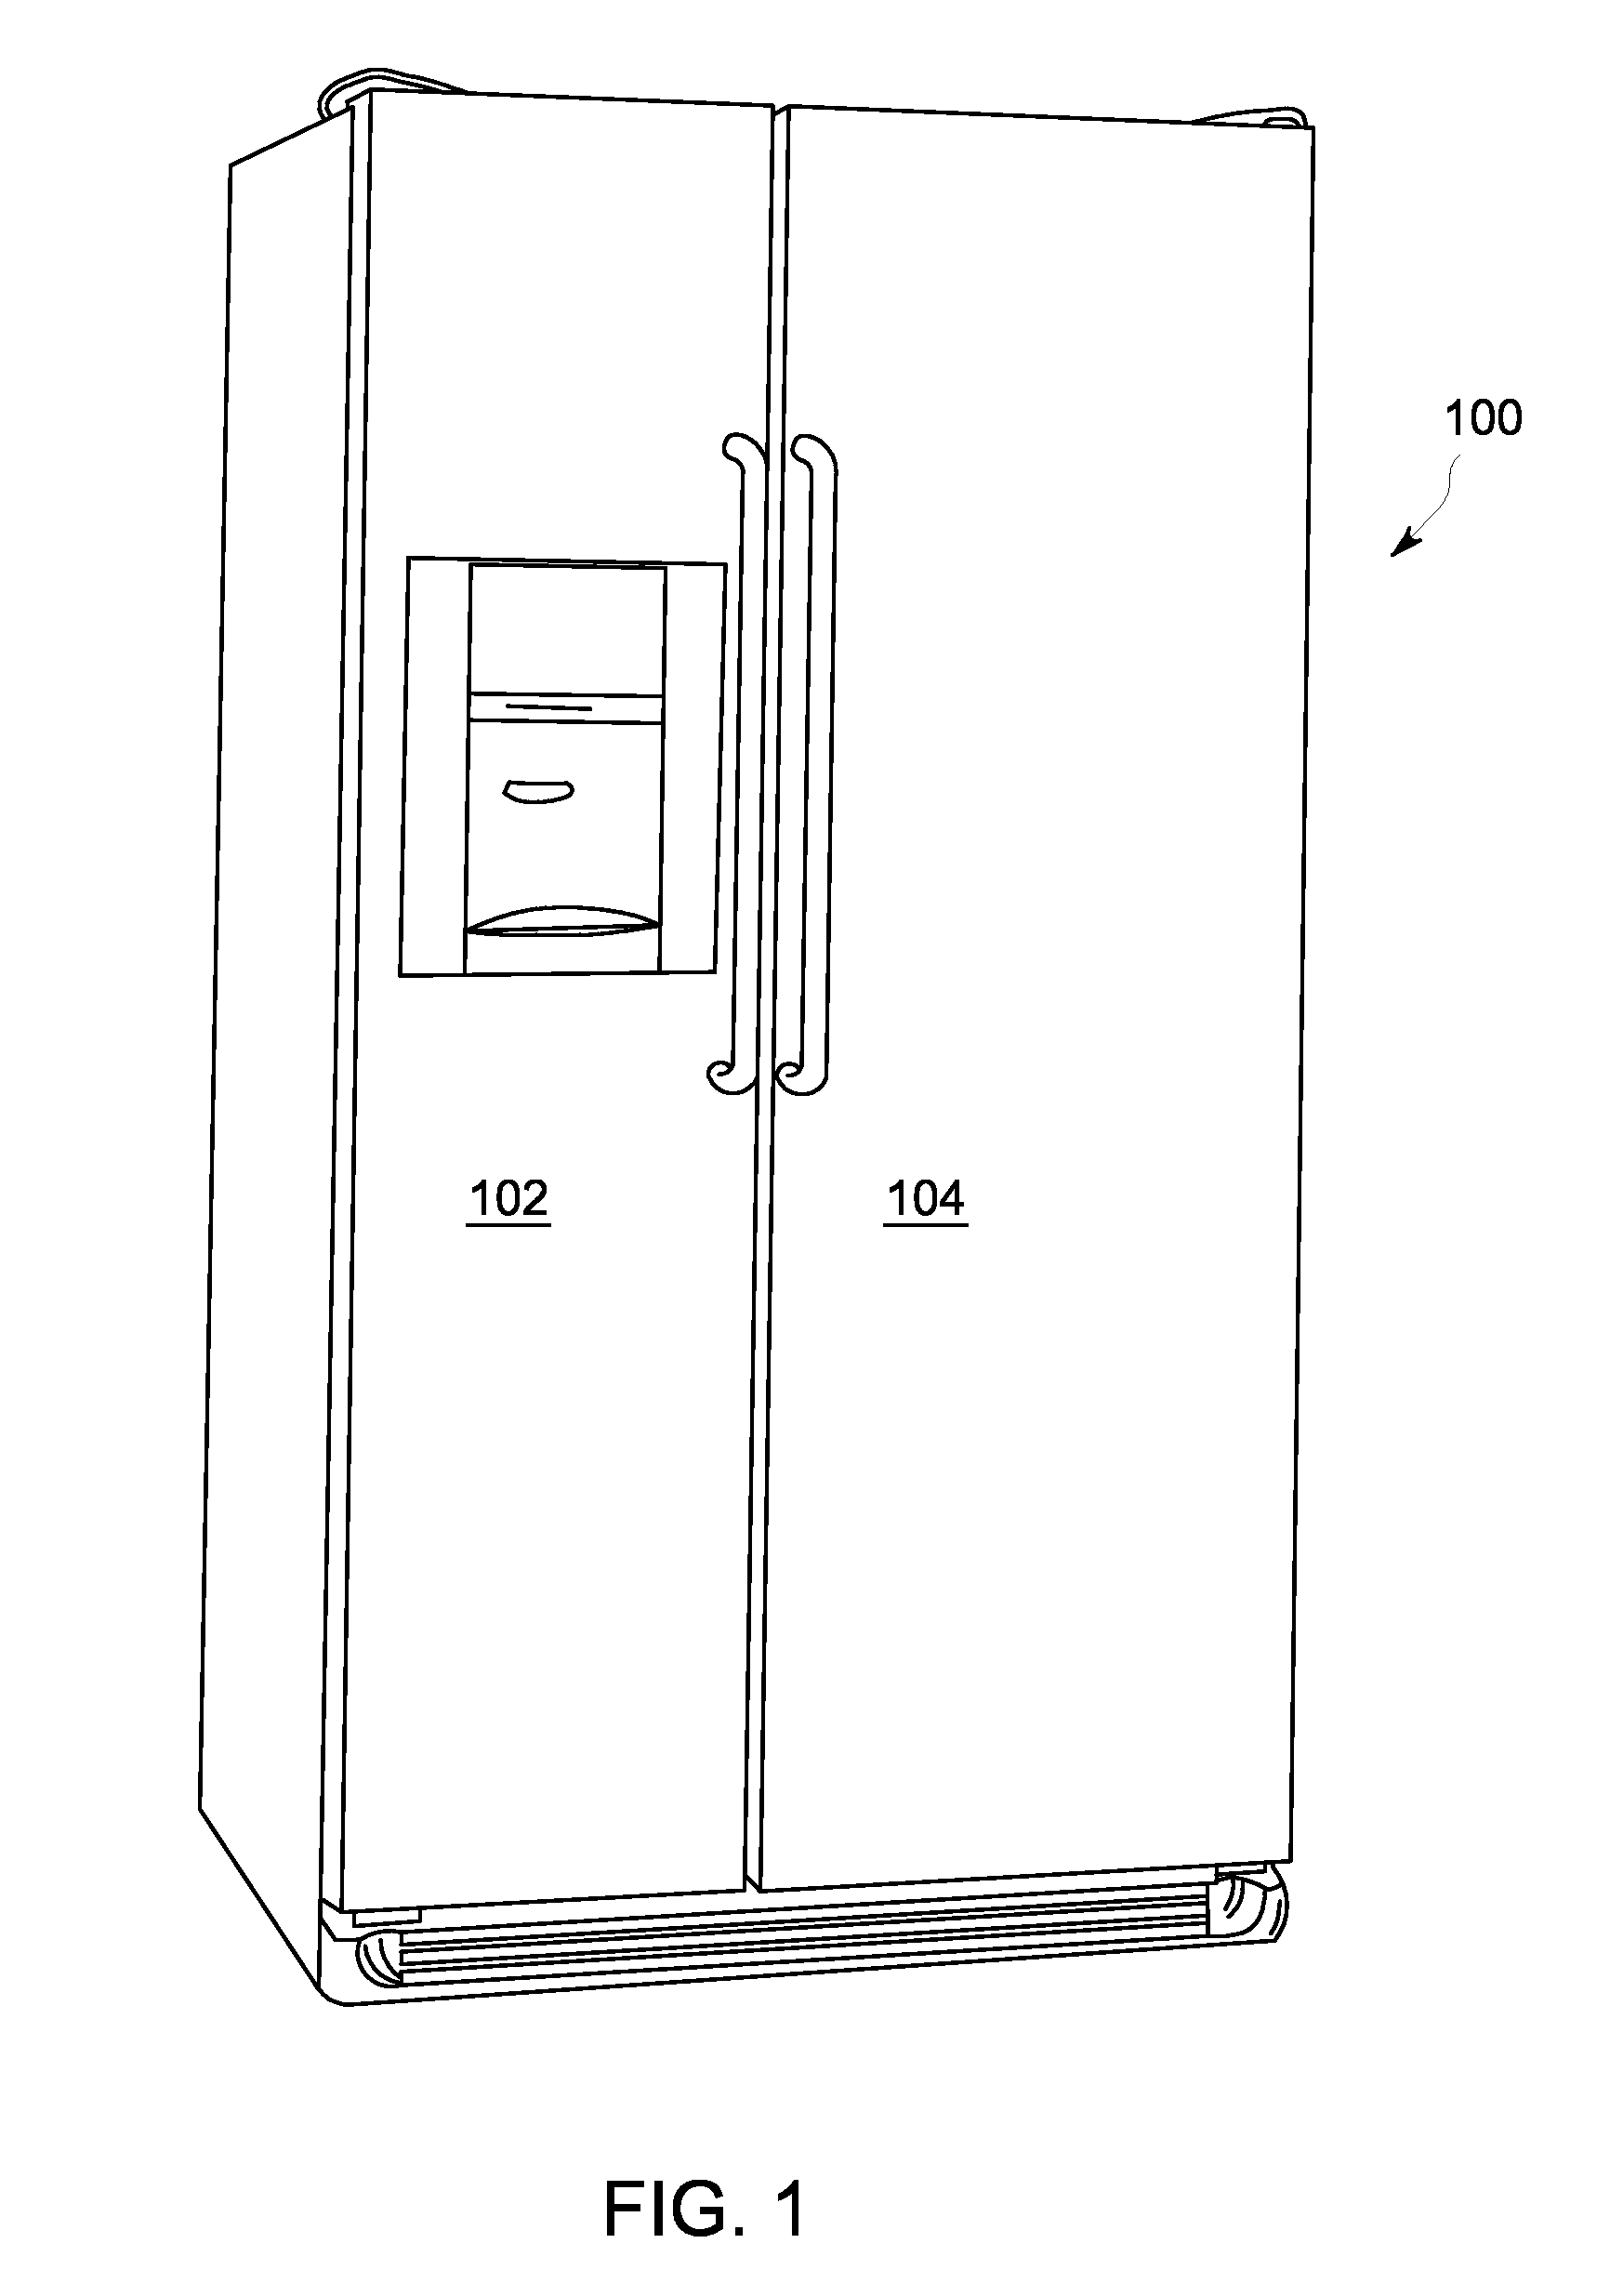 Connection point for communication device on appliance